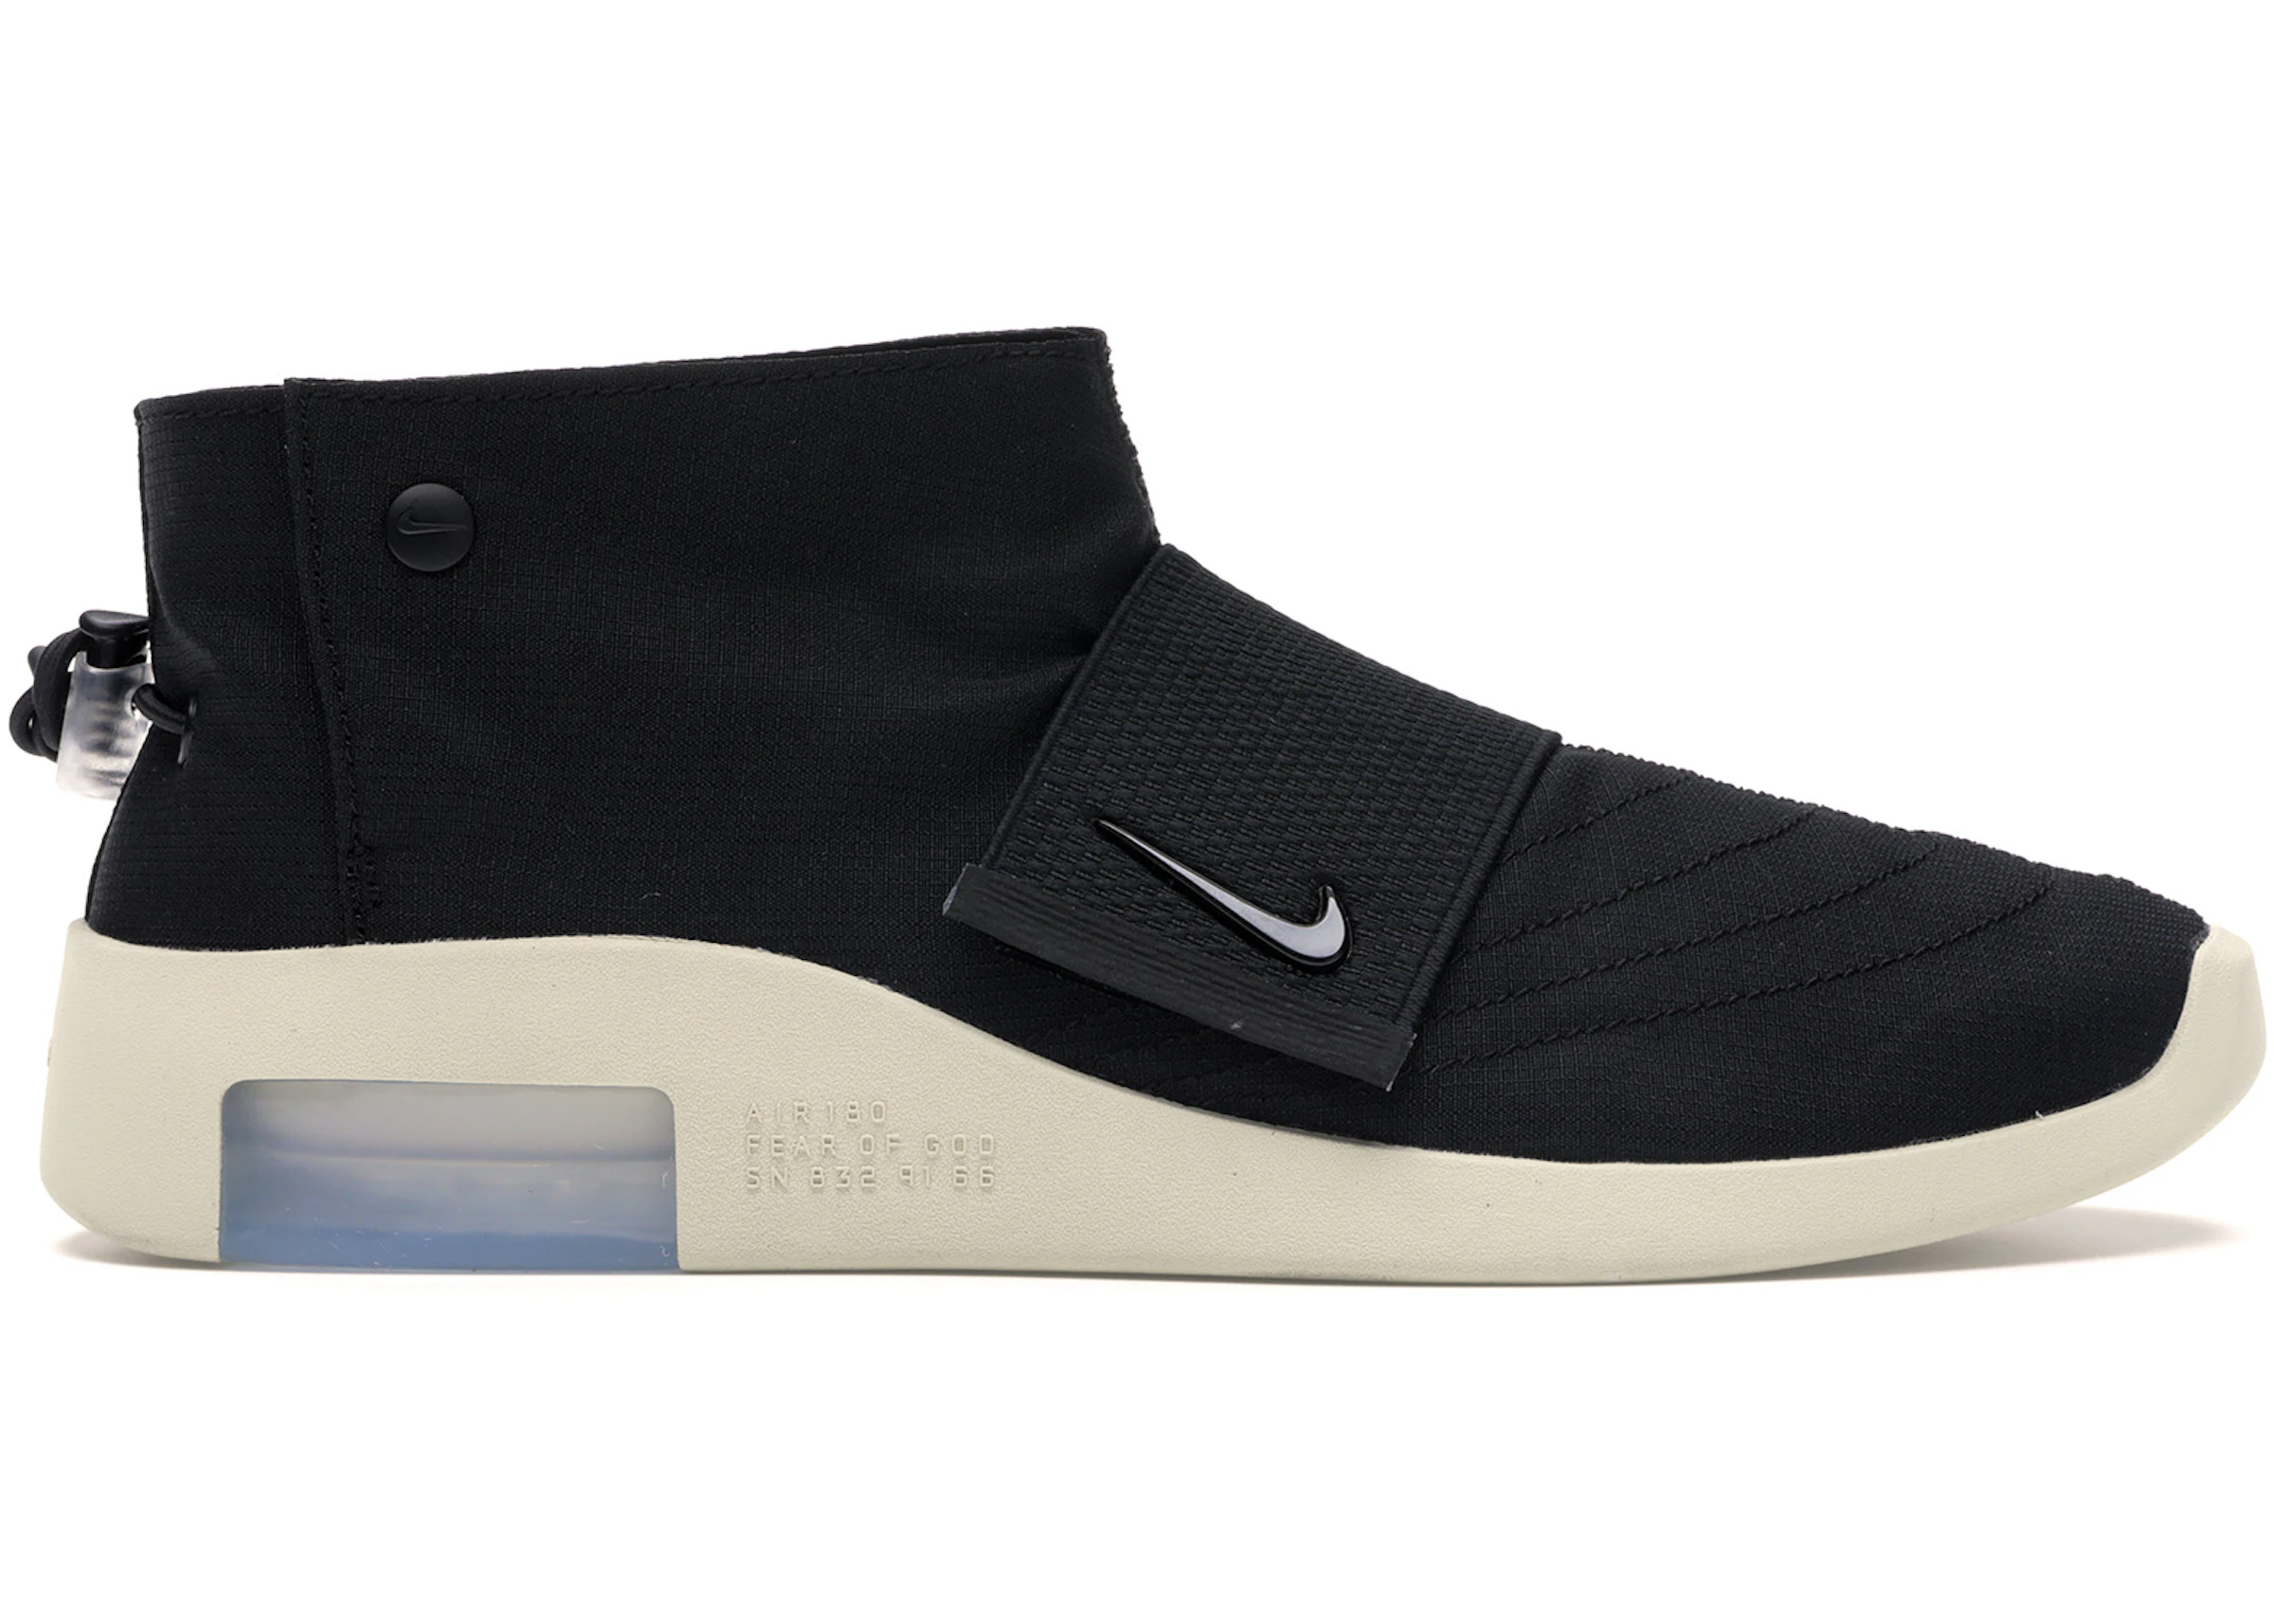 Chapel Unsuitable practice Nike Air Fear Of God Moccasin Black - AT8086-002 - US